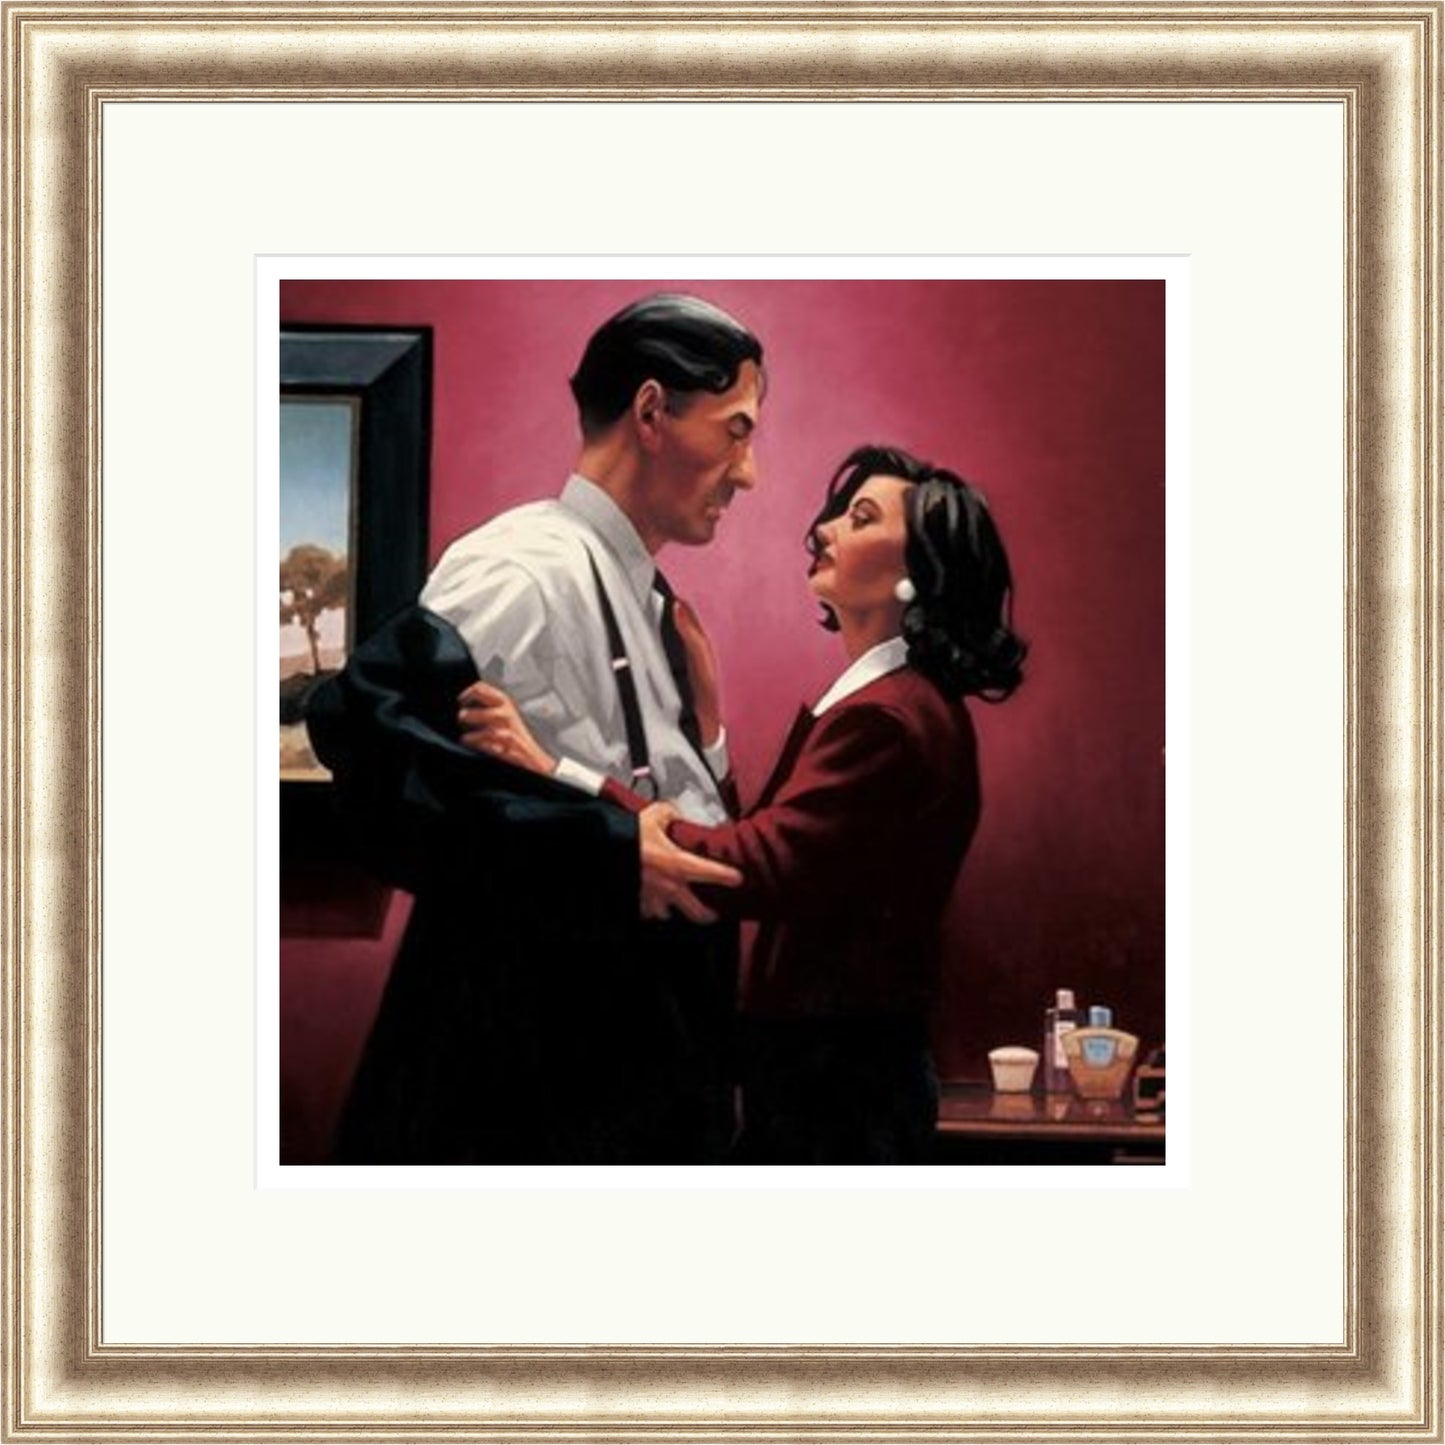 Welcome to my World by Jack Vettriano